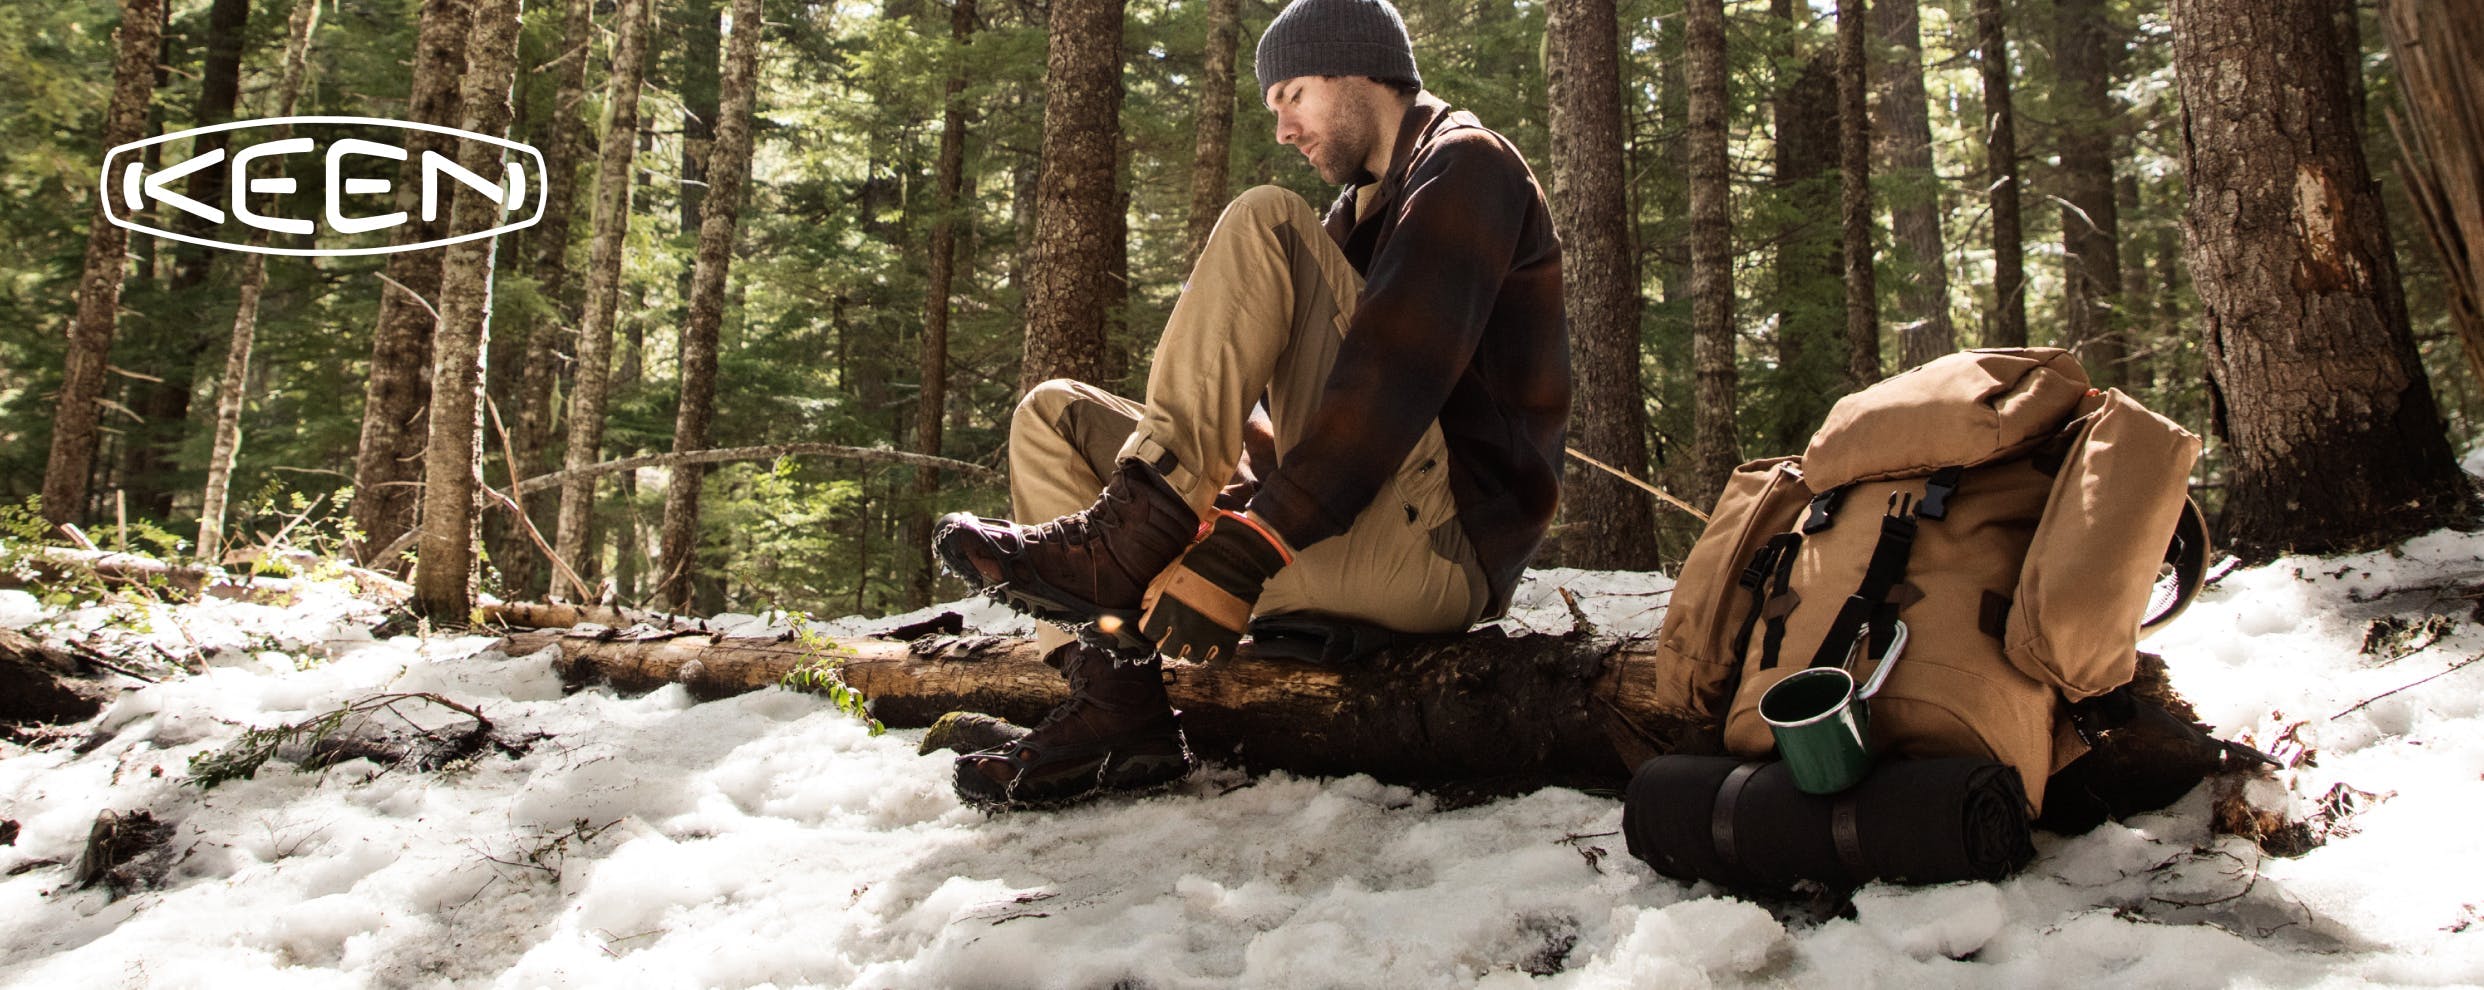 30% off winter footwear. Some best-selling boots are on sale, but they’re stepping out fast. Lace up while you can.